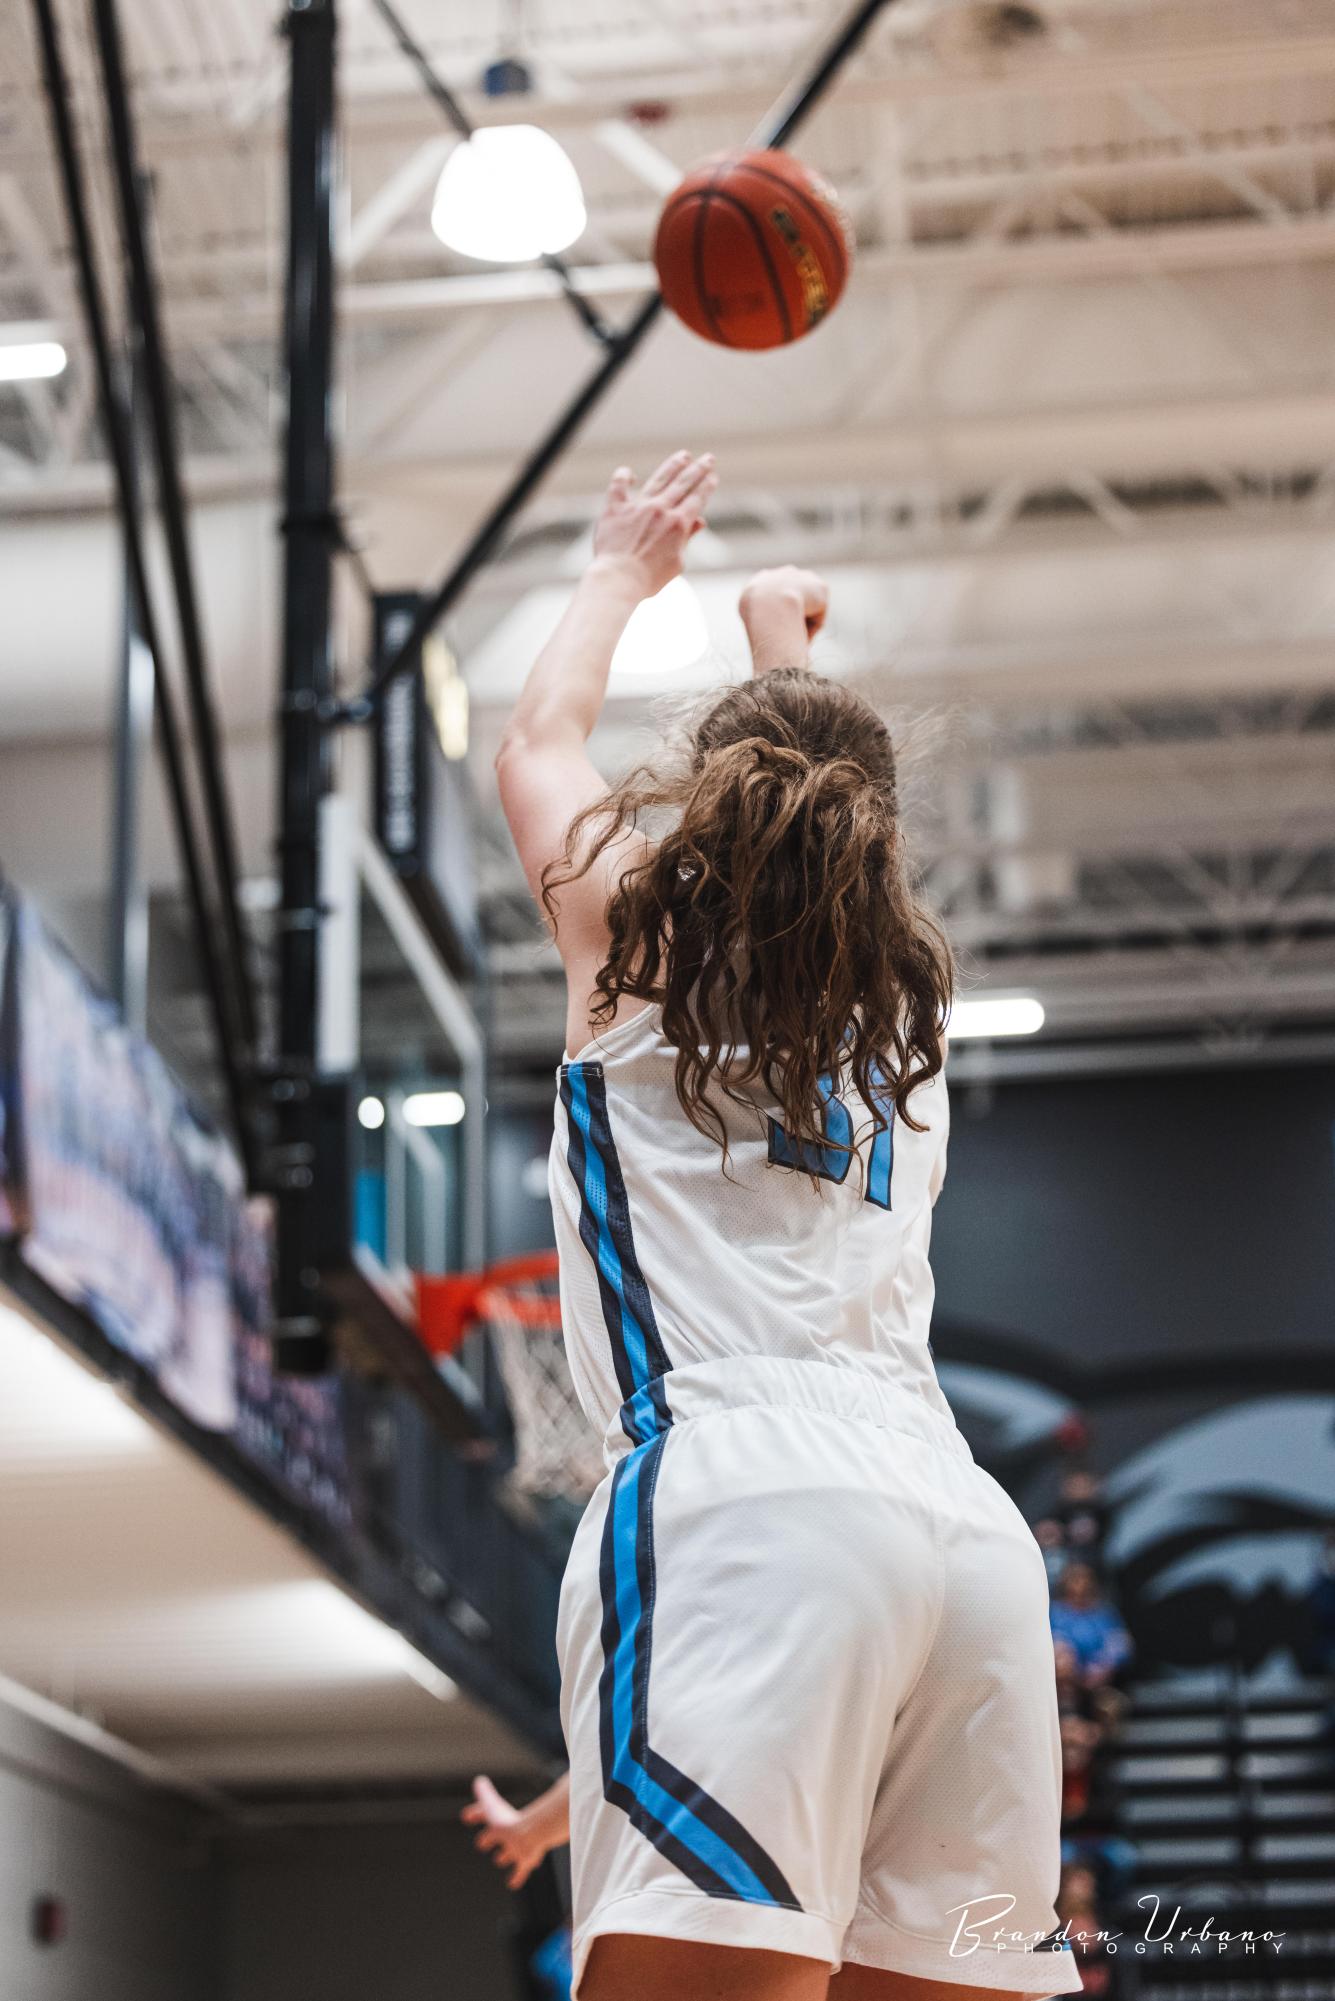 McKenna Murphy (31) draining a shot against Waverly on December 18, 2022. Murphy is now committed to play Division I basketball at Colorado State University. 